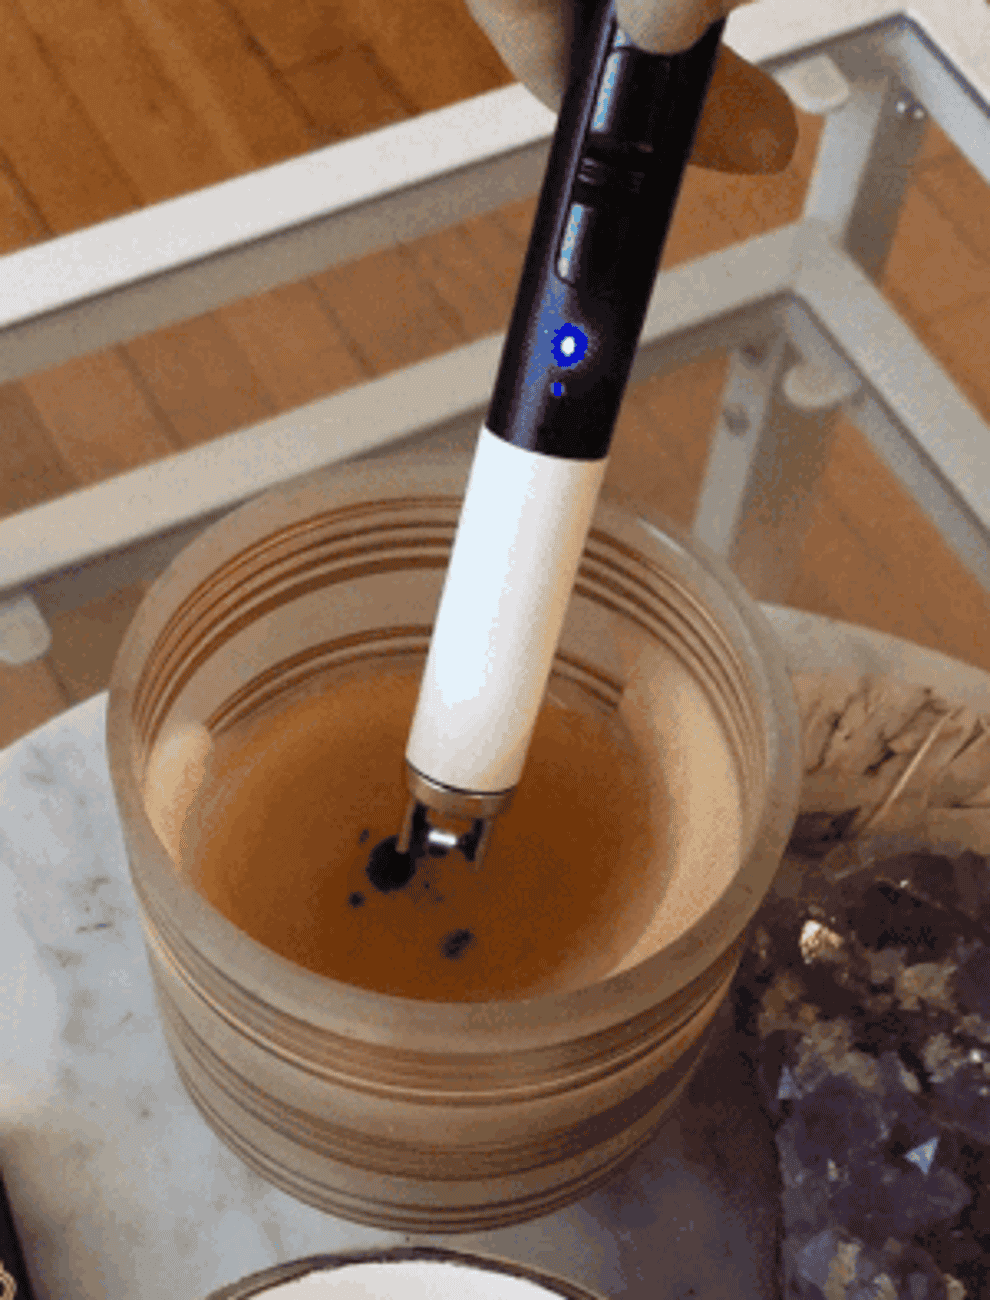 Gif of BuzzFeed editor using the lighter to light a candle